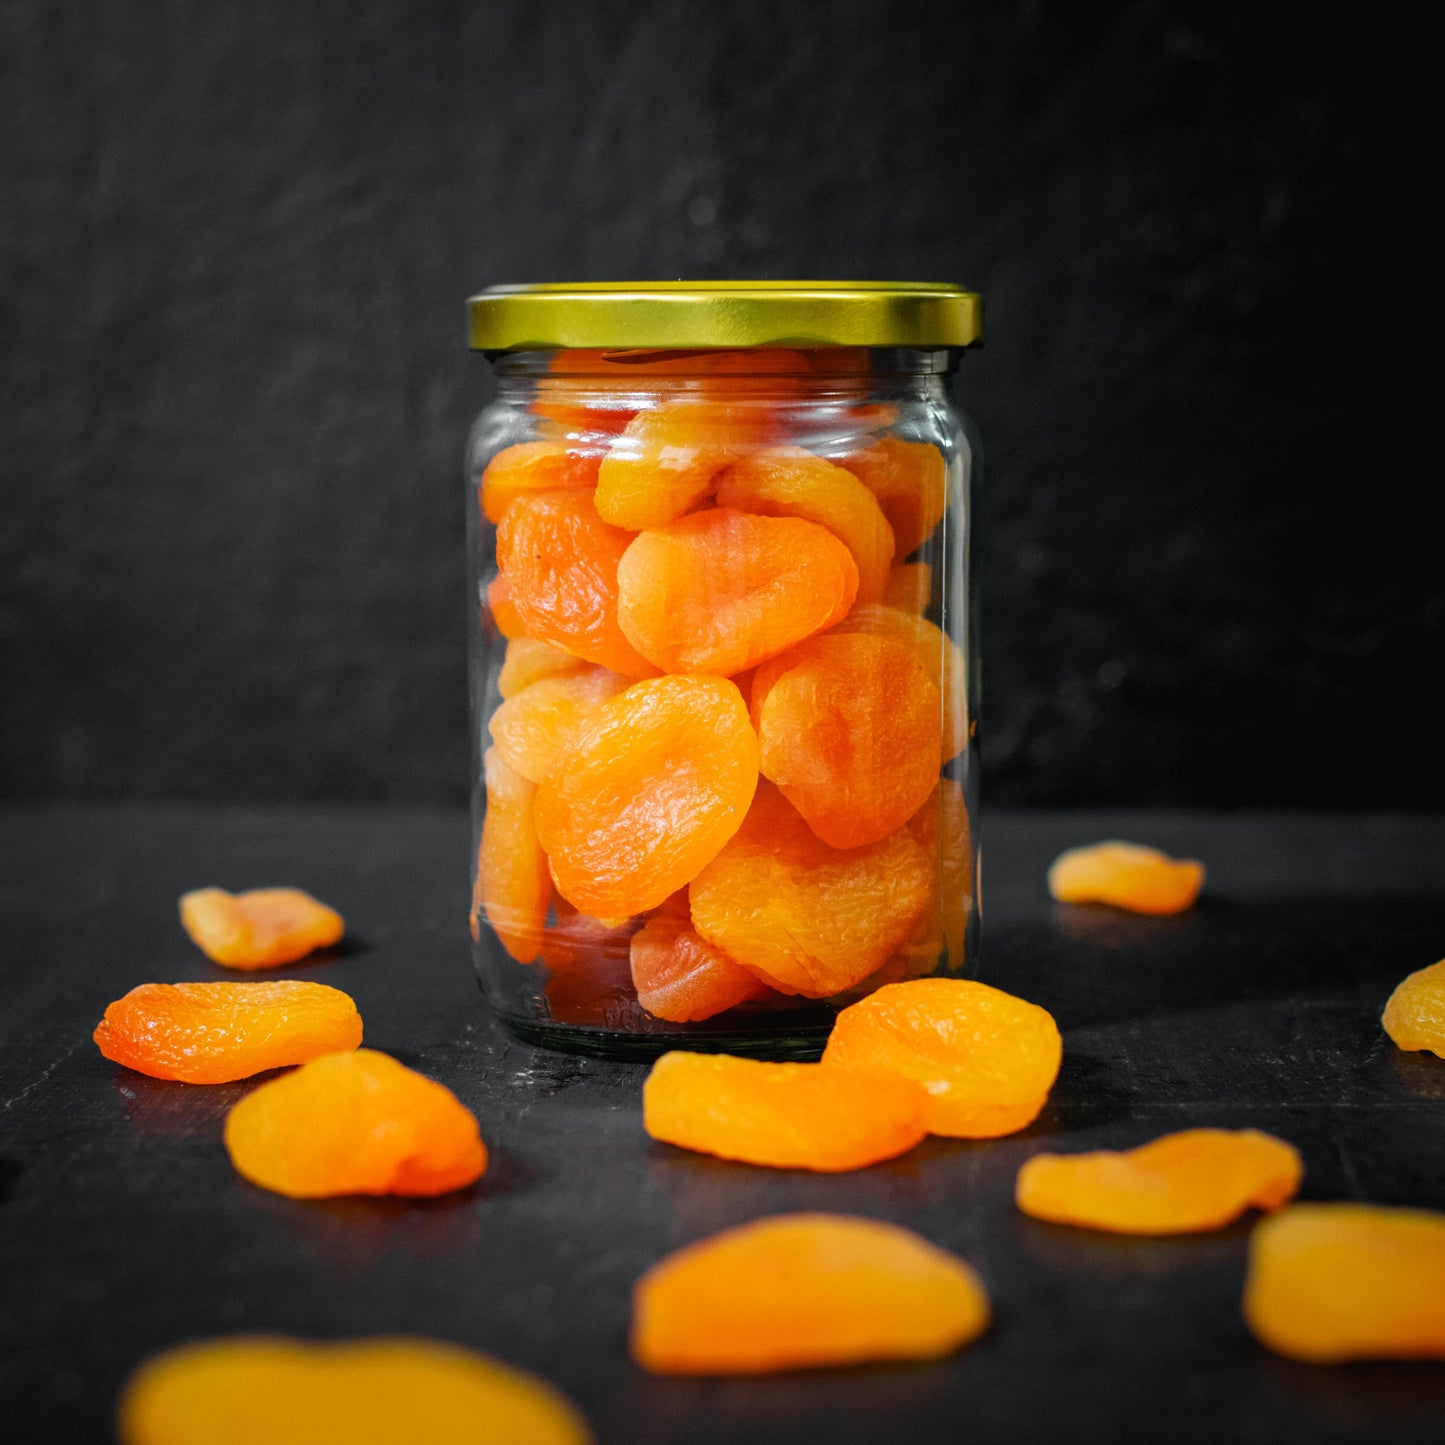 Dried Apricots - The Nuttery